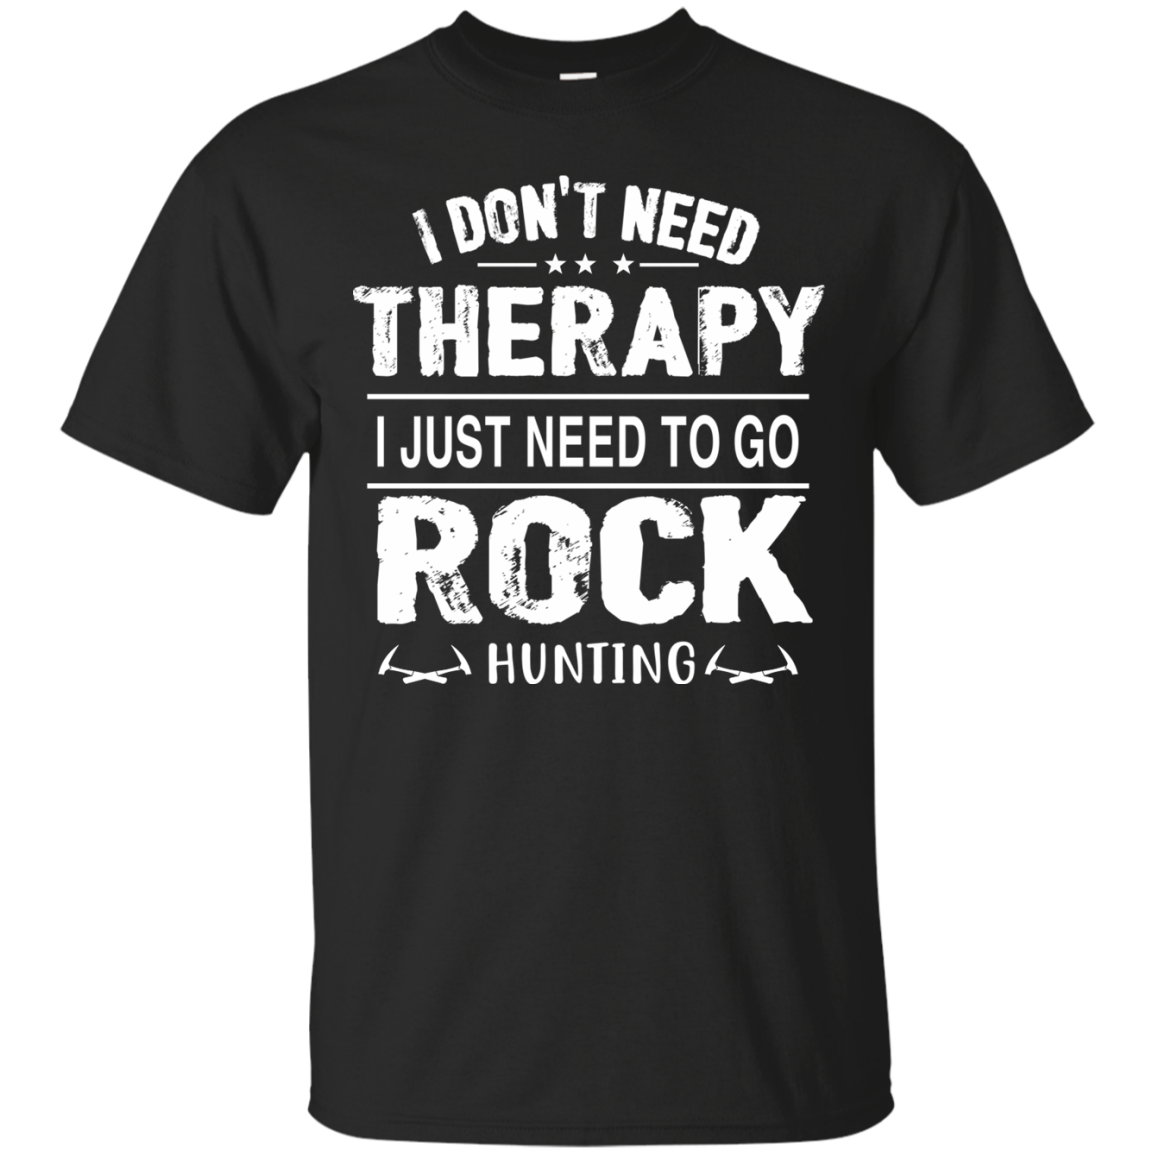 Shop From 1000 Unique Funny Rock Hunting Therapy Geology Mineral Collector Tshirt Ultra Co